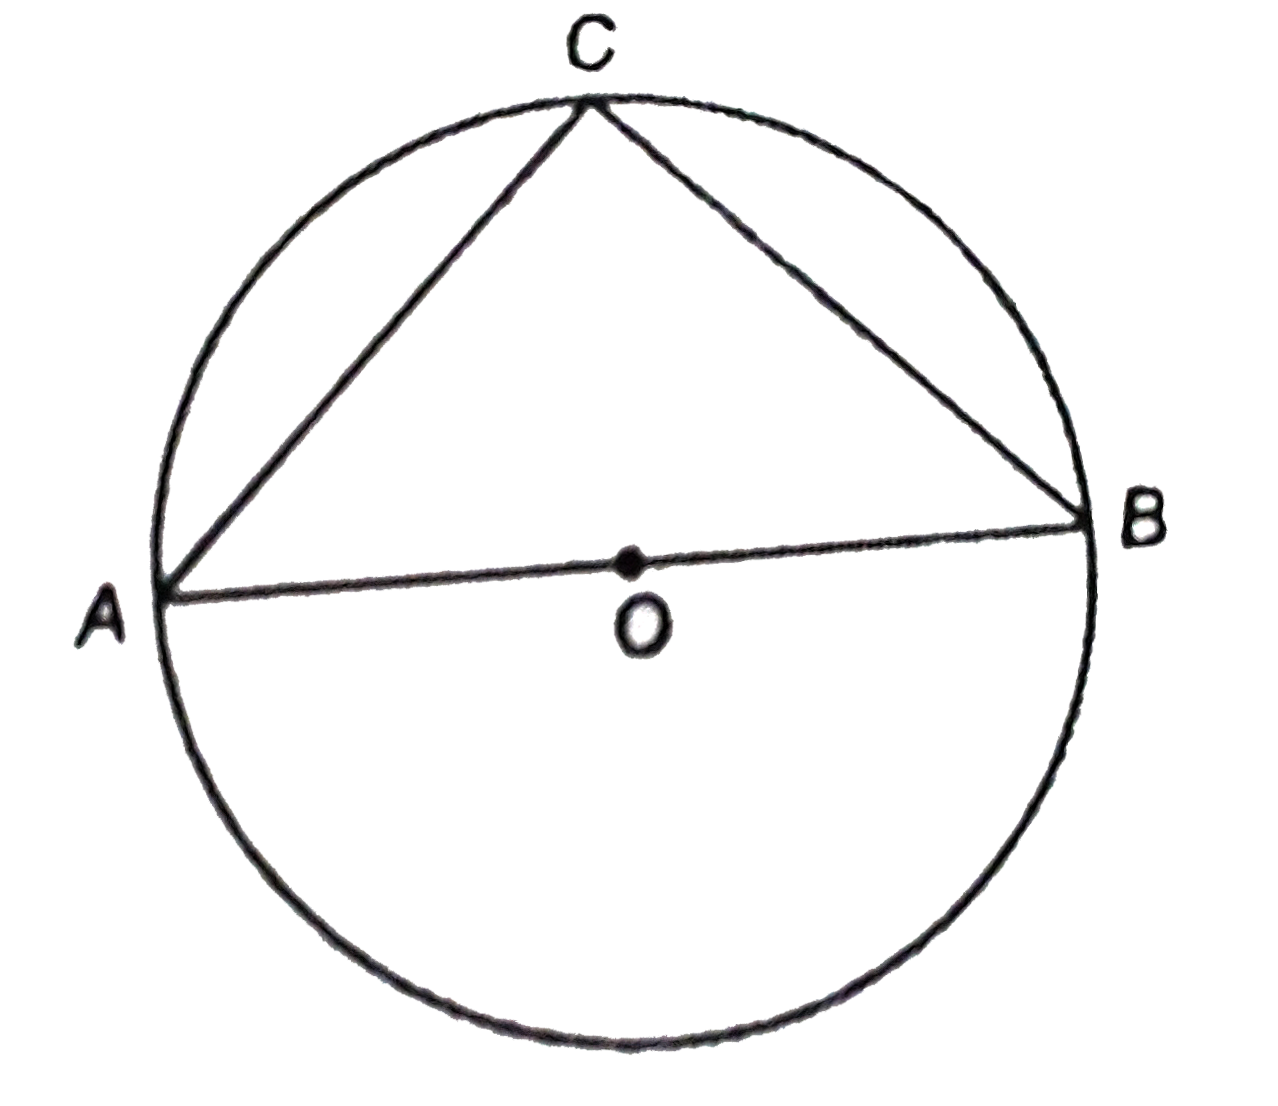 O is the centre of a circle of diameter AB. If chord AC= chord BC, then find the value of angleABC.